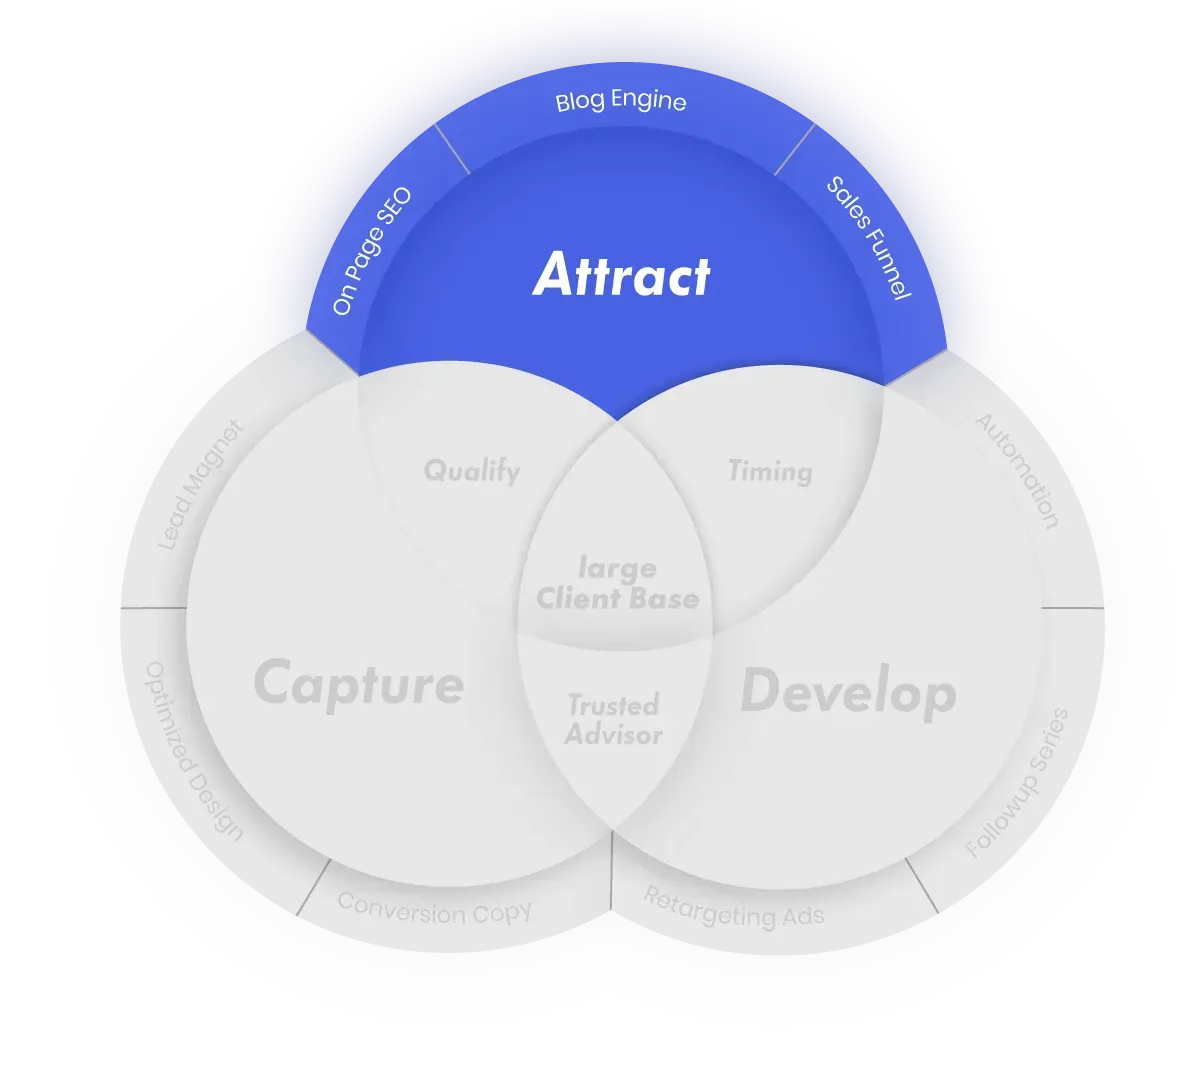 Attact includes On page SEO, Blog Engine and Sales Funnel.  The Attract Section on the 3 part image is in blue while the other two are grayed out